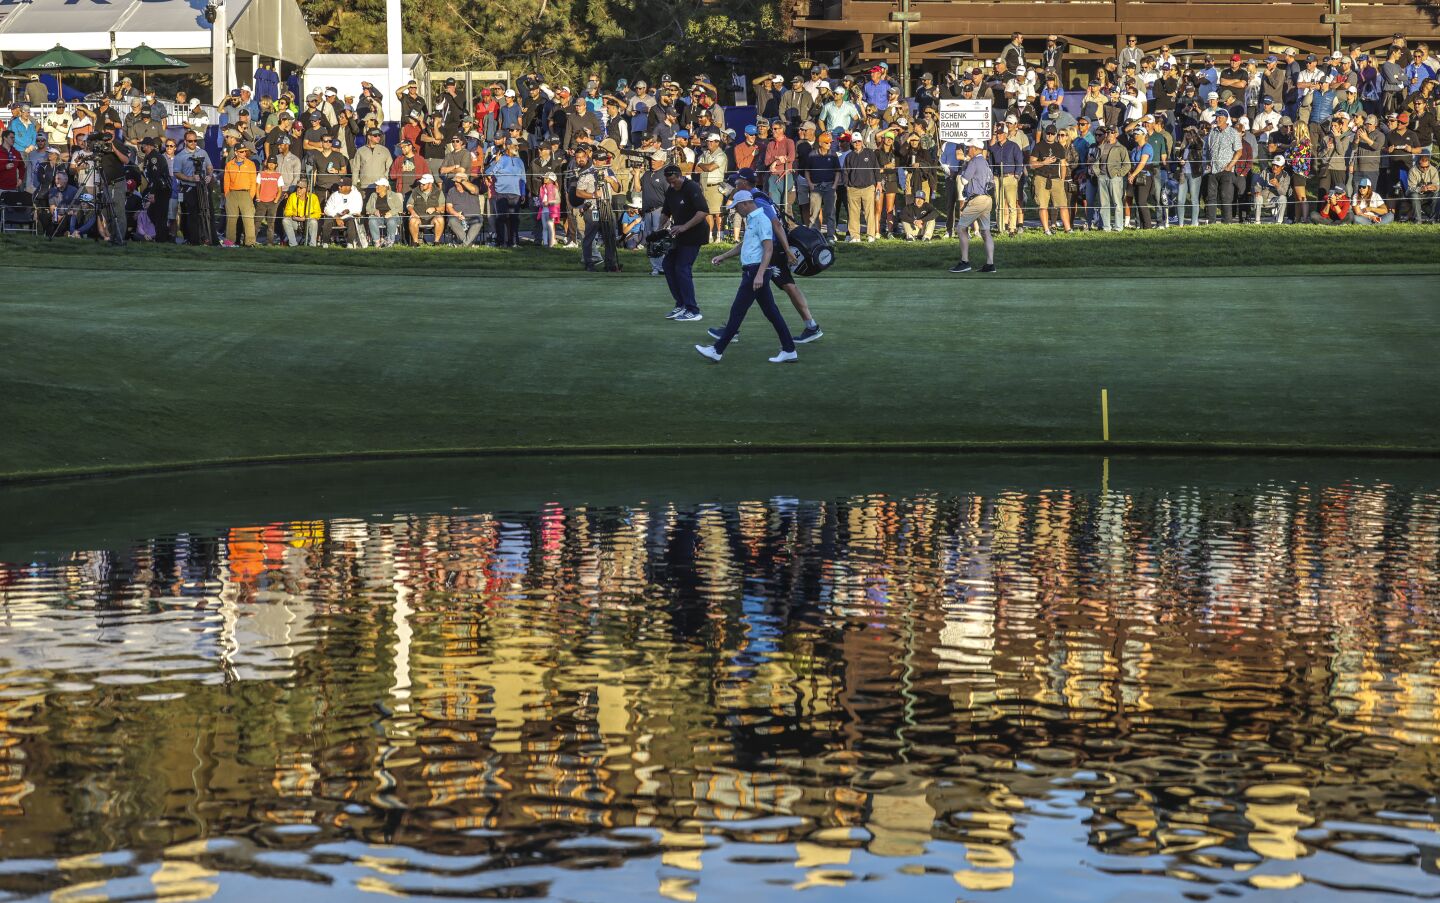 Justin Thomas walks past the pond at the South Course's 18th green during the third round of the Farmers Insurance Open on Jan. 28.